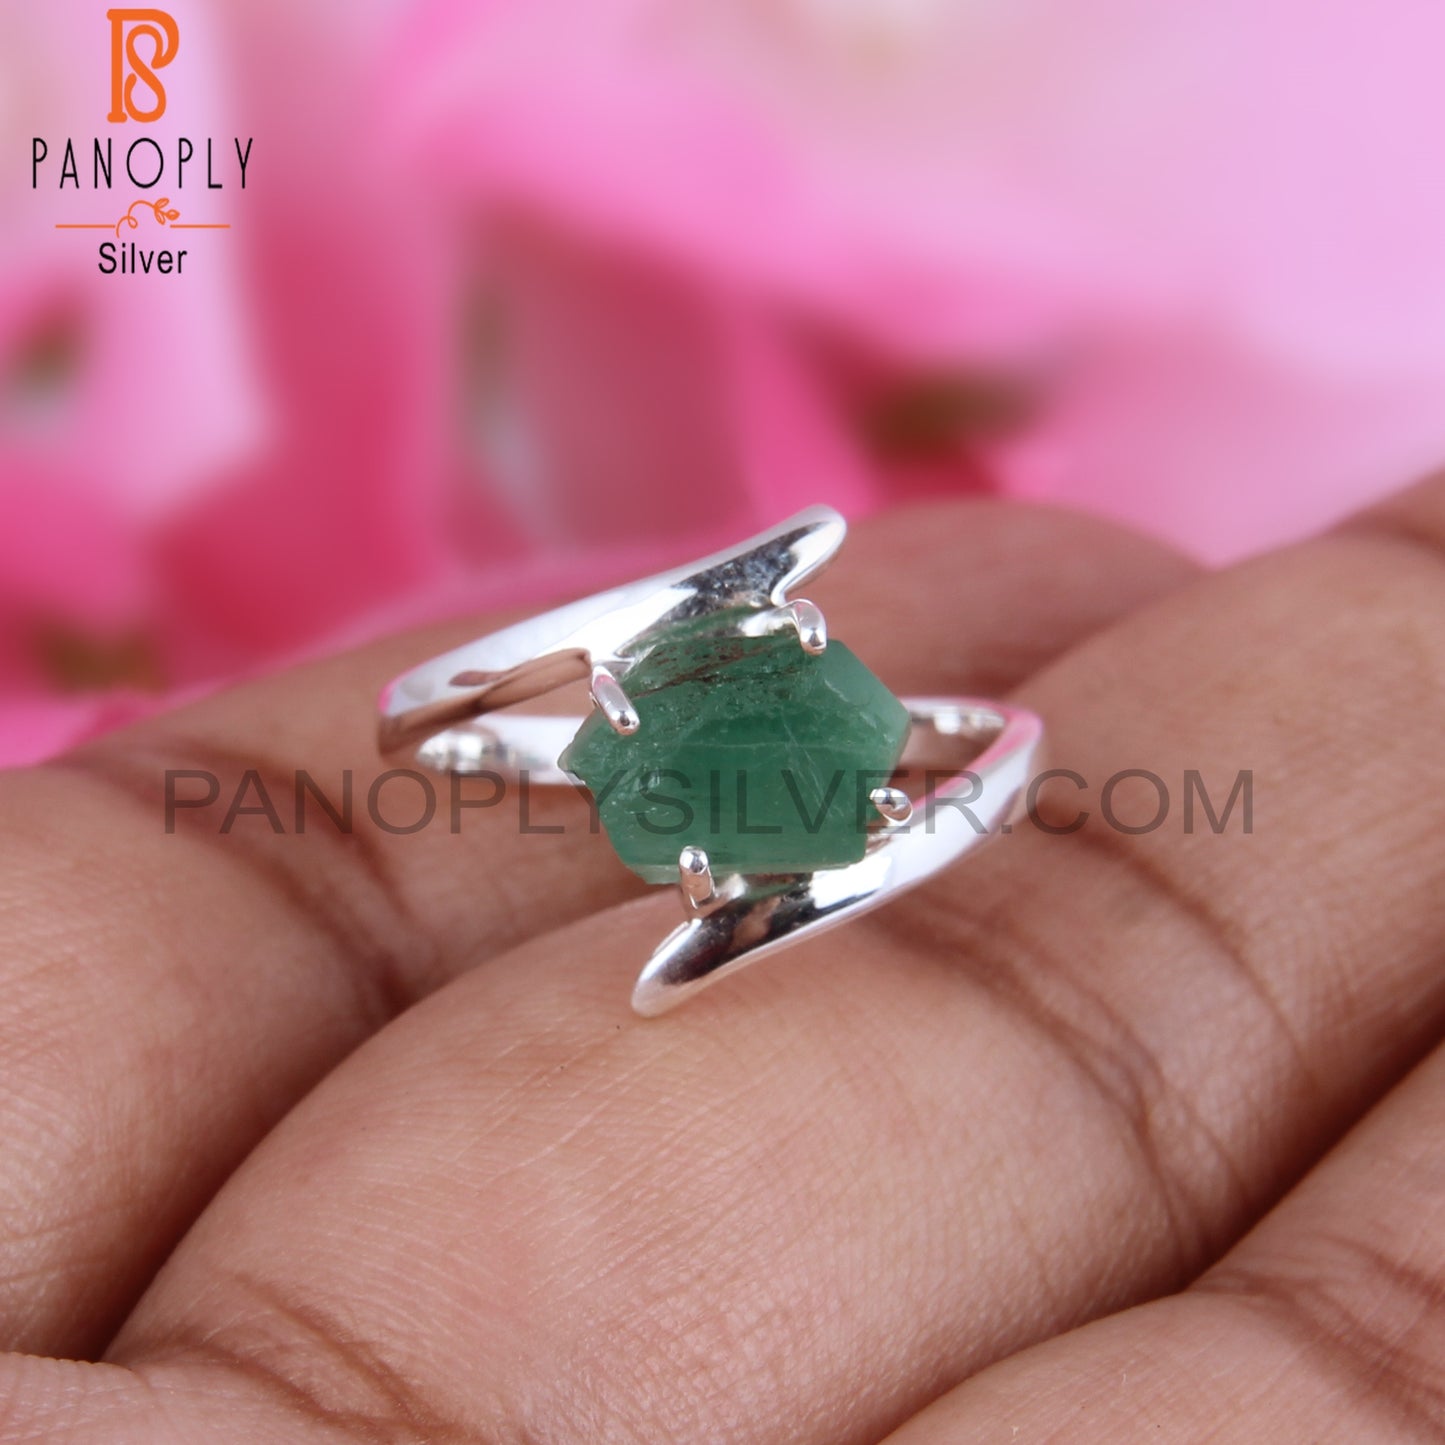 Attractive Emerald Rough 925 Sterling Silver Ring